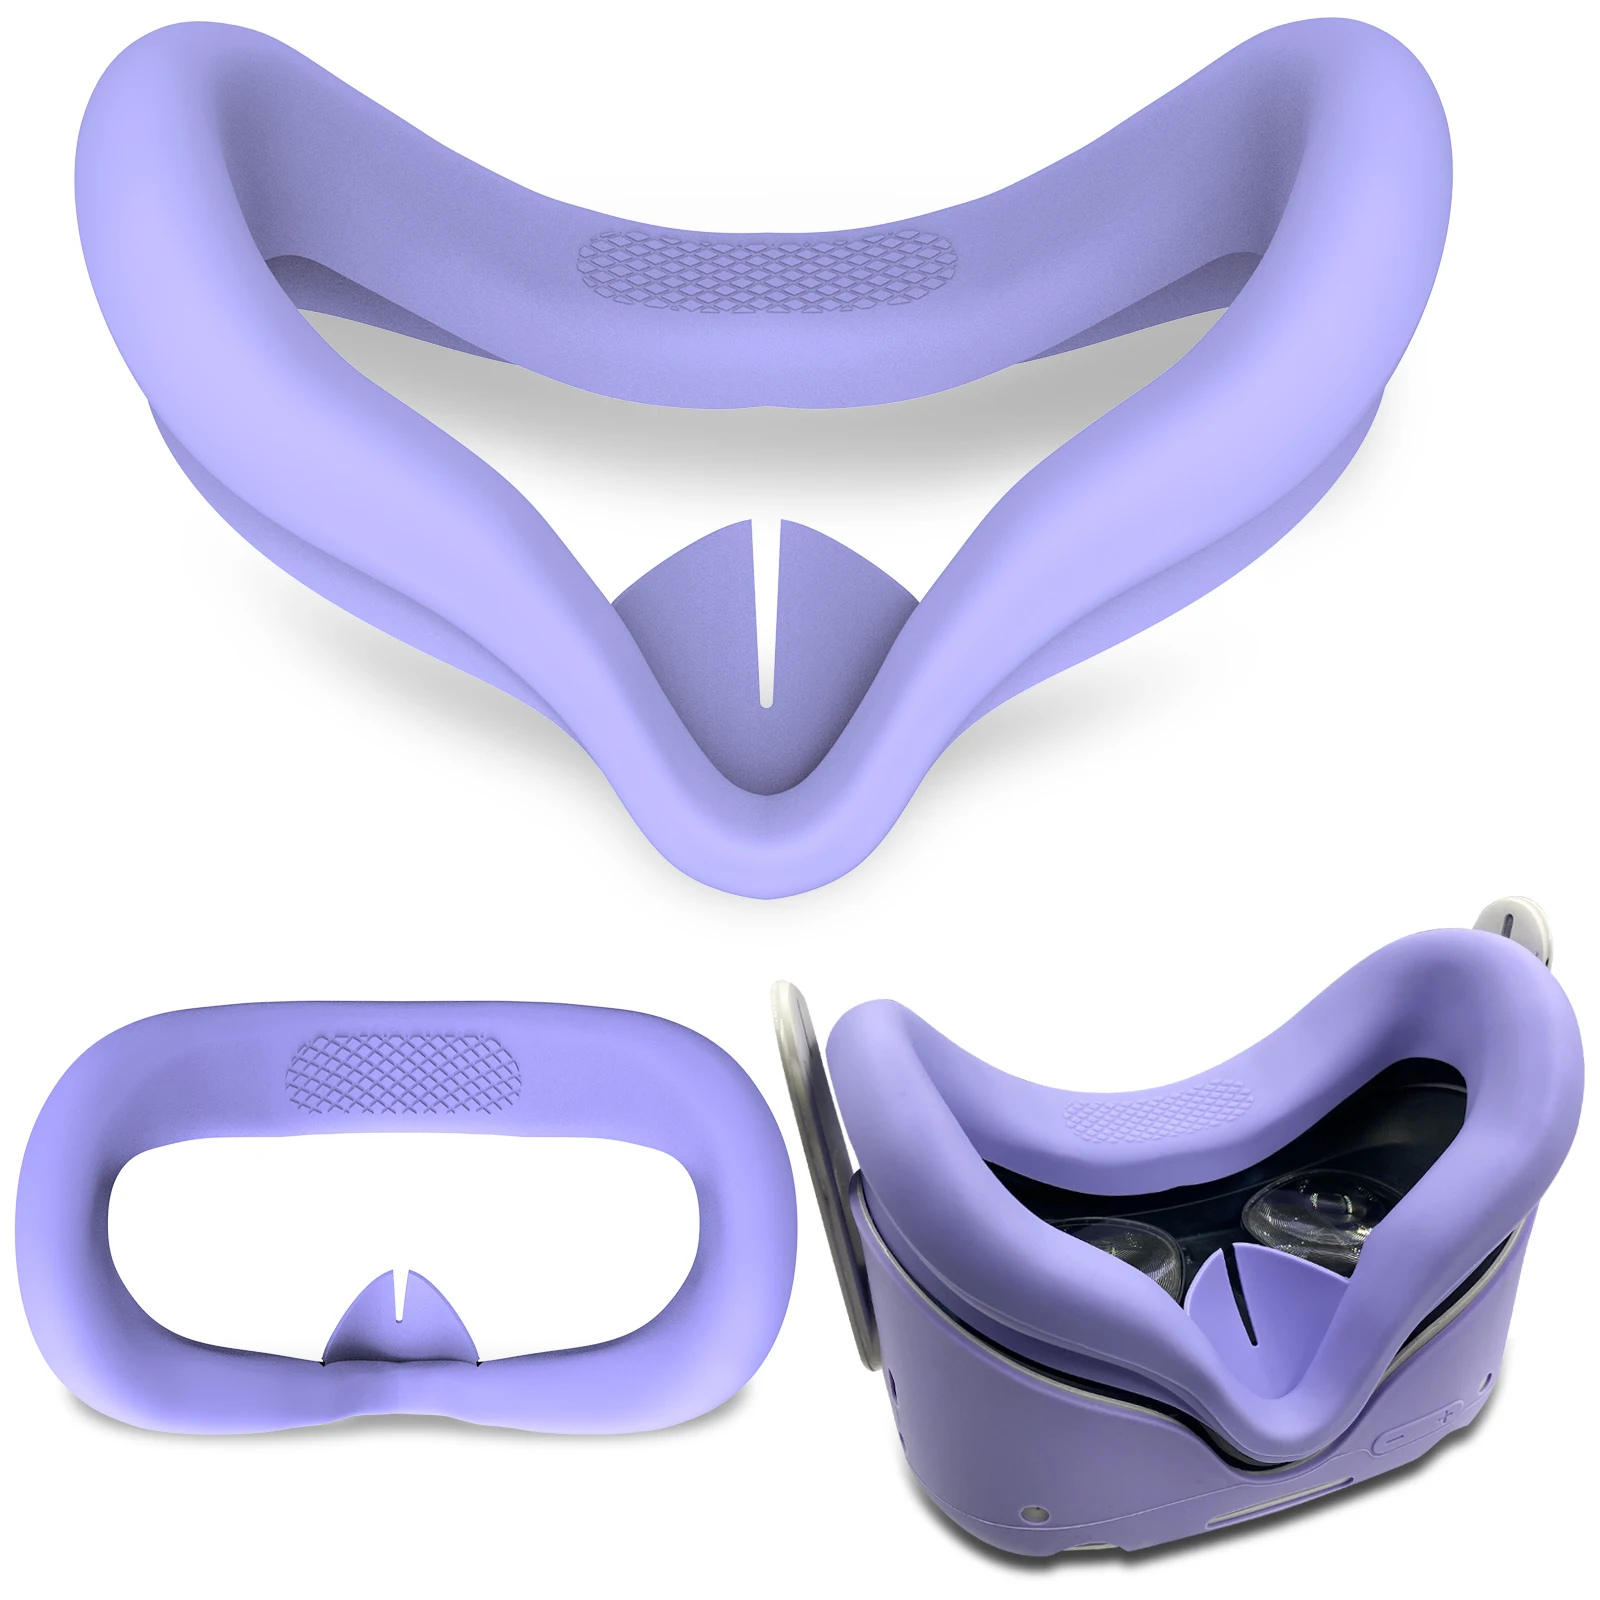 https://ae01.alicdn.com/kf/S0895c07aa3f642c9a002c2045689a9d83/FOR-Oculus-Quest-2-Silicone-Cover-Kit-VR-Touch-Controller-Shell-Lens-Rod-Cap-Handle-Grip.jpg